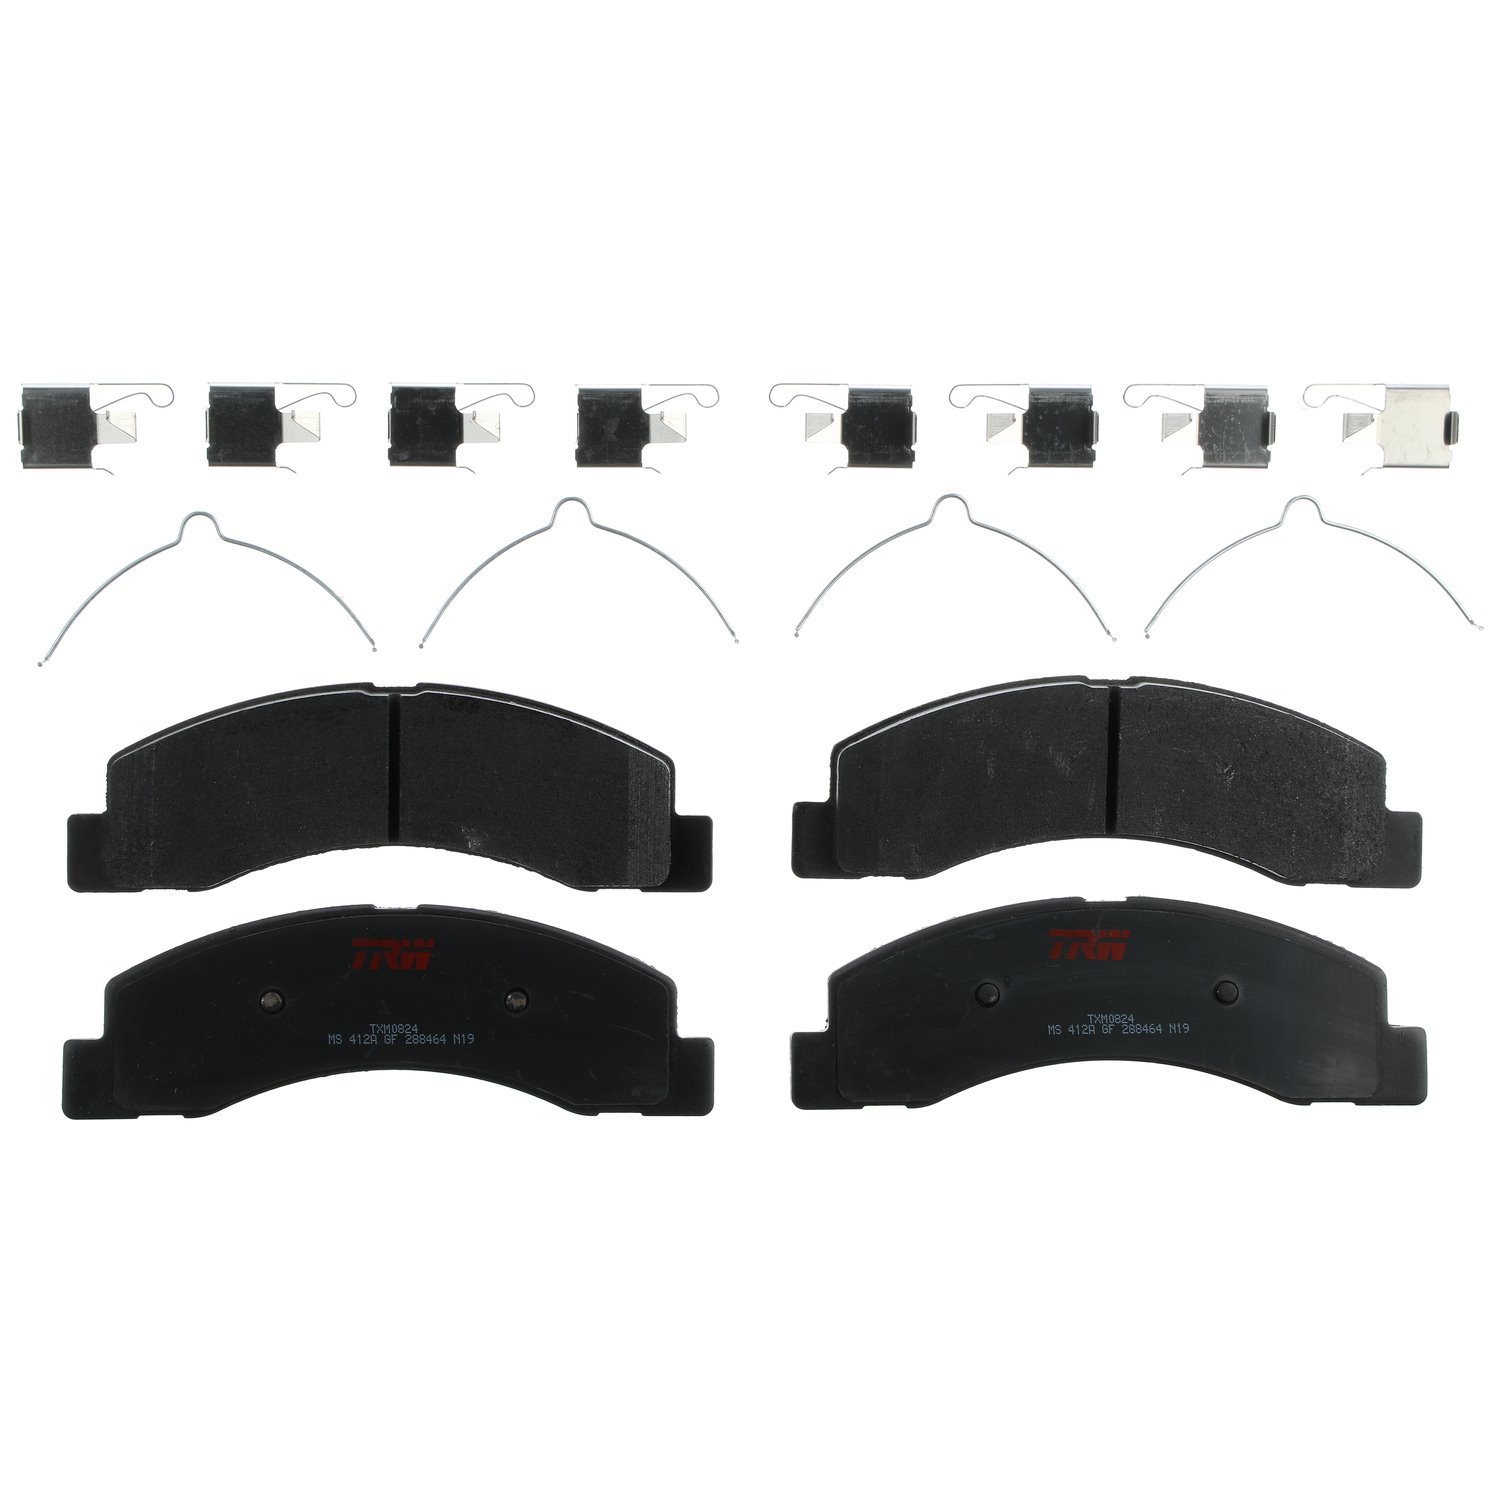 TXM0824 Ultra-Series Disc Brake Pad Set for Ford Excursion 2005-2000, F-250/F-350 Super Duty 2004-2000, Position: Front